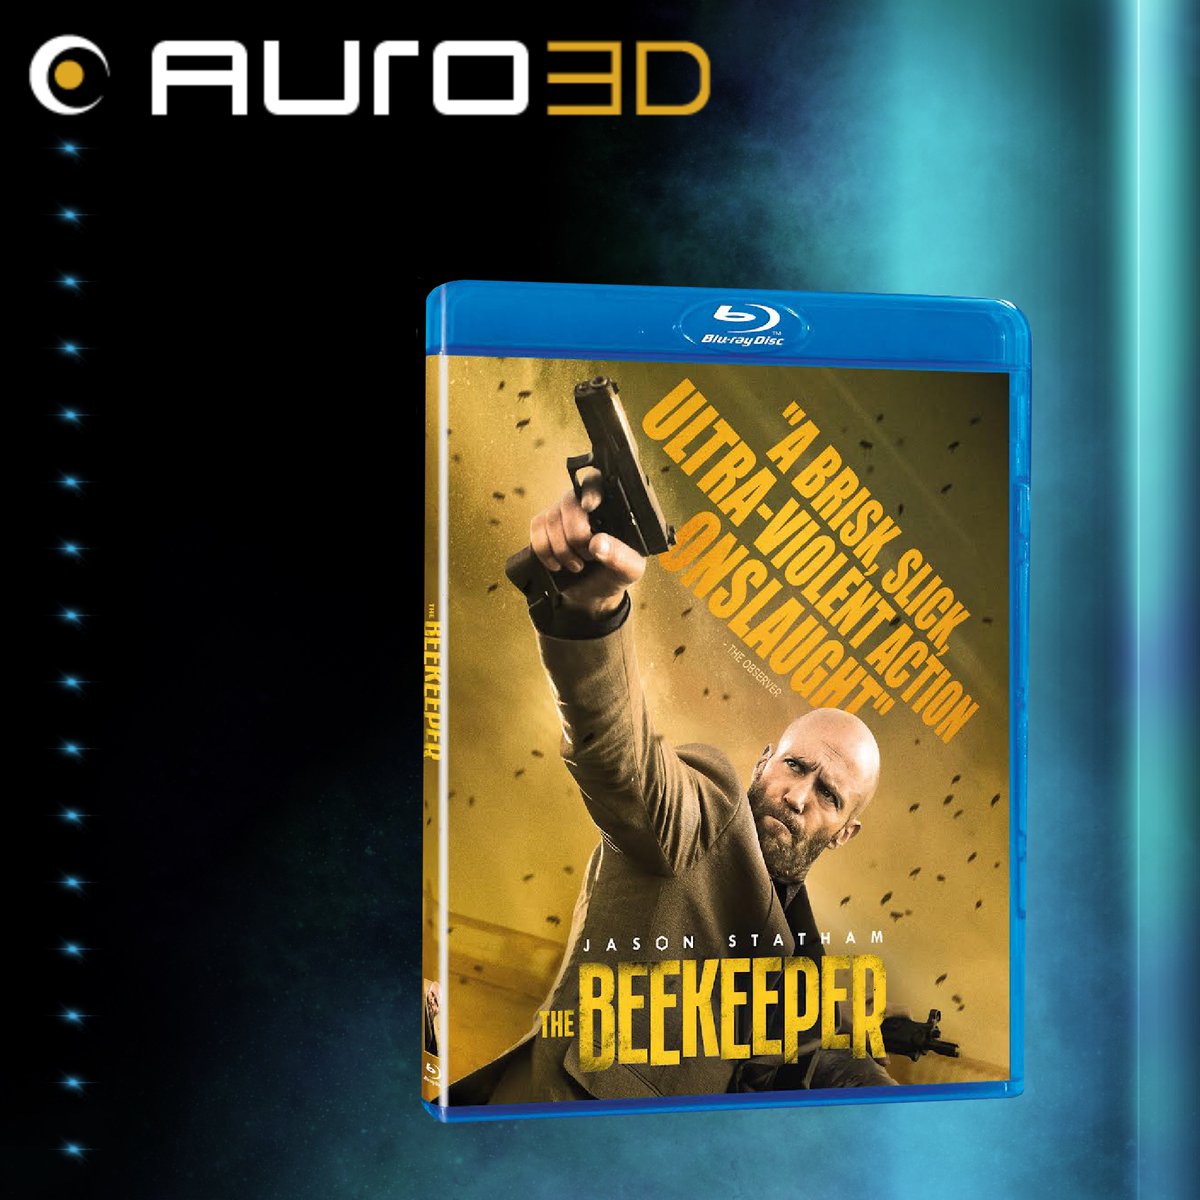 For the BENELUX region we supported the release of 'Beekeeper' for Blu-ray and 4K-UHD! for our international fans, you might want to get the 4K-UHD as it will be region free!

bol.com/nl/nl/p/beekee…

#movie #movies #immersiveaudio #spatialaudio #bluray #4kuhd